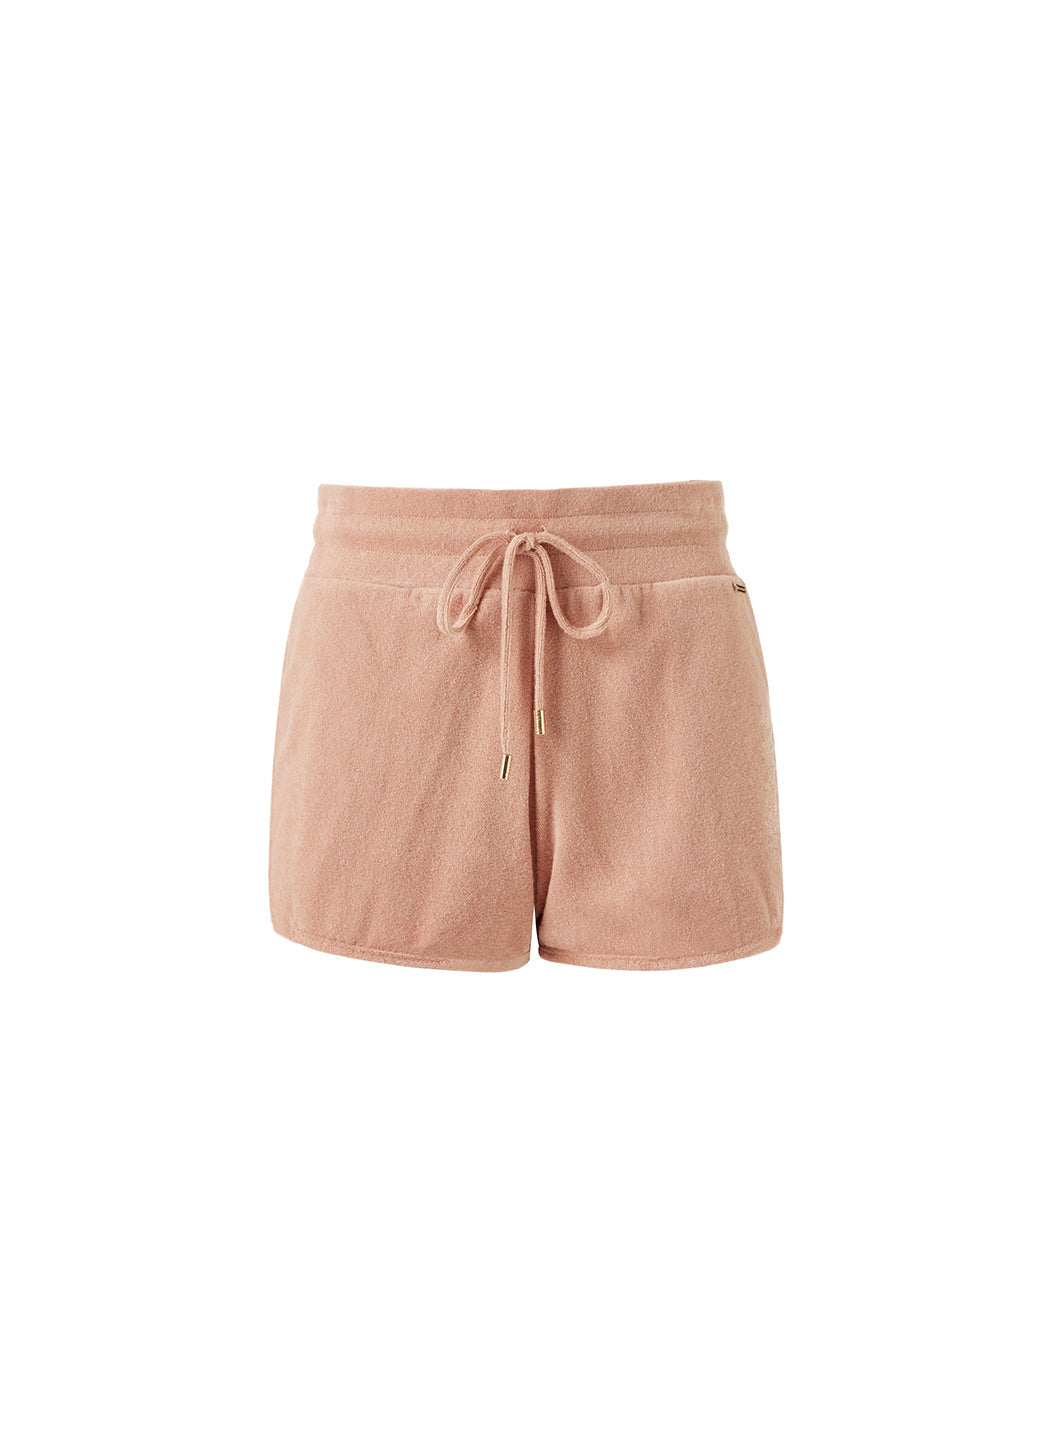 Melissa Odabash Harley Tan Terry Runner Shorts - 2024 Collection